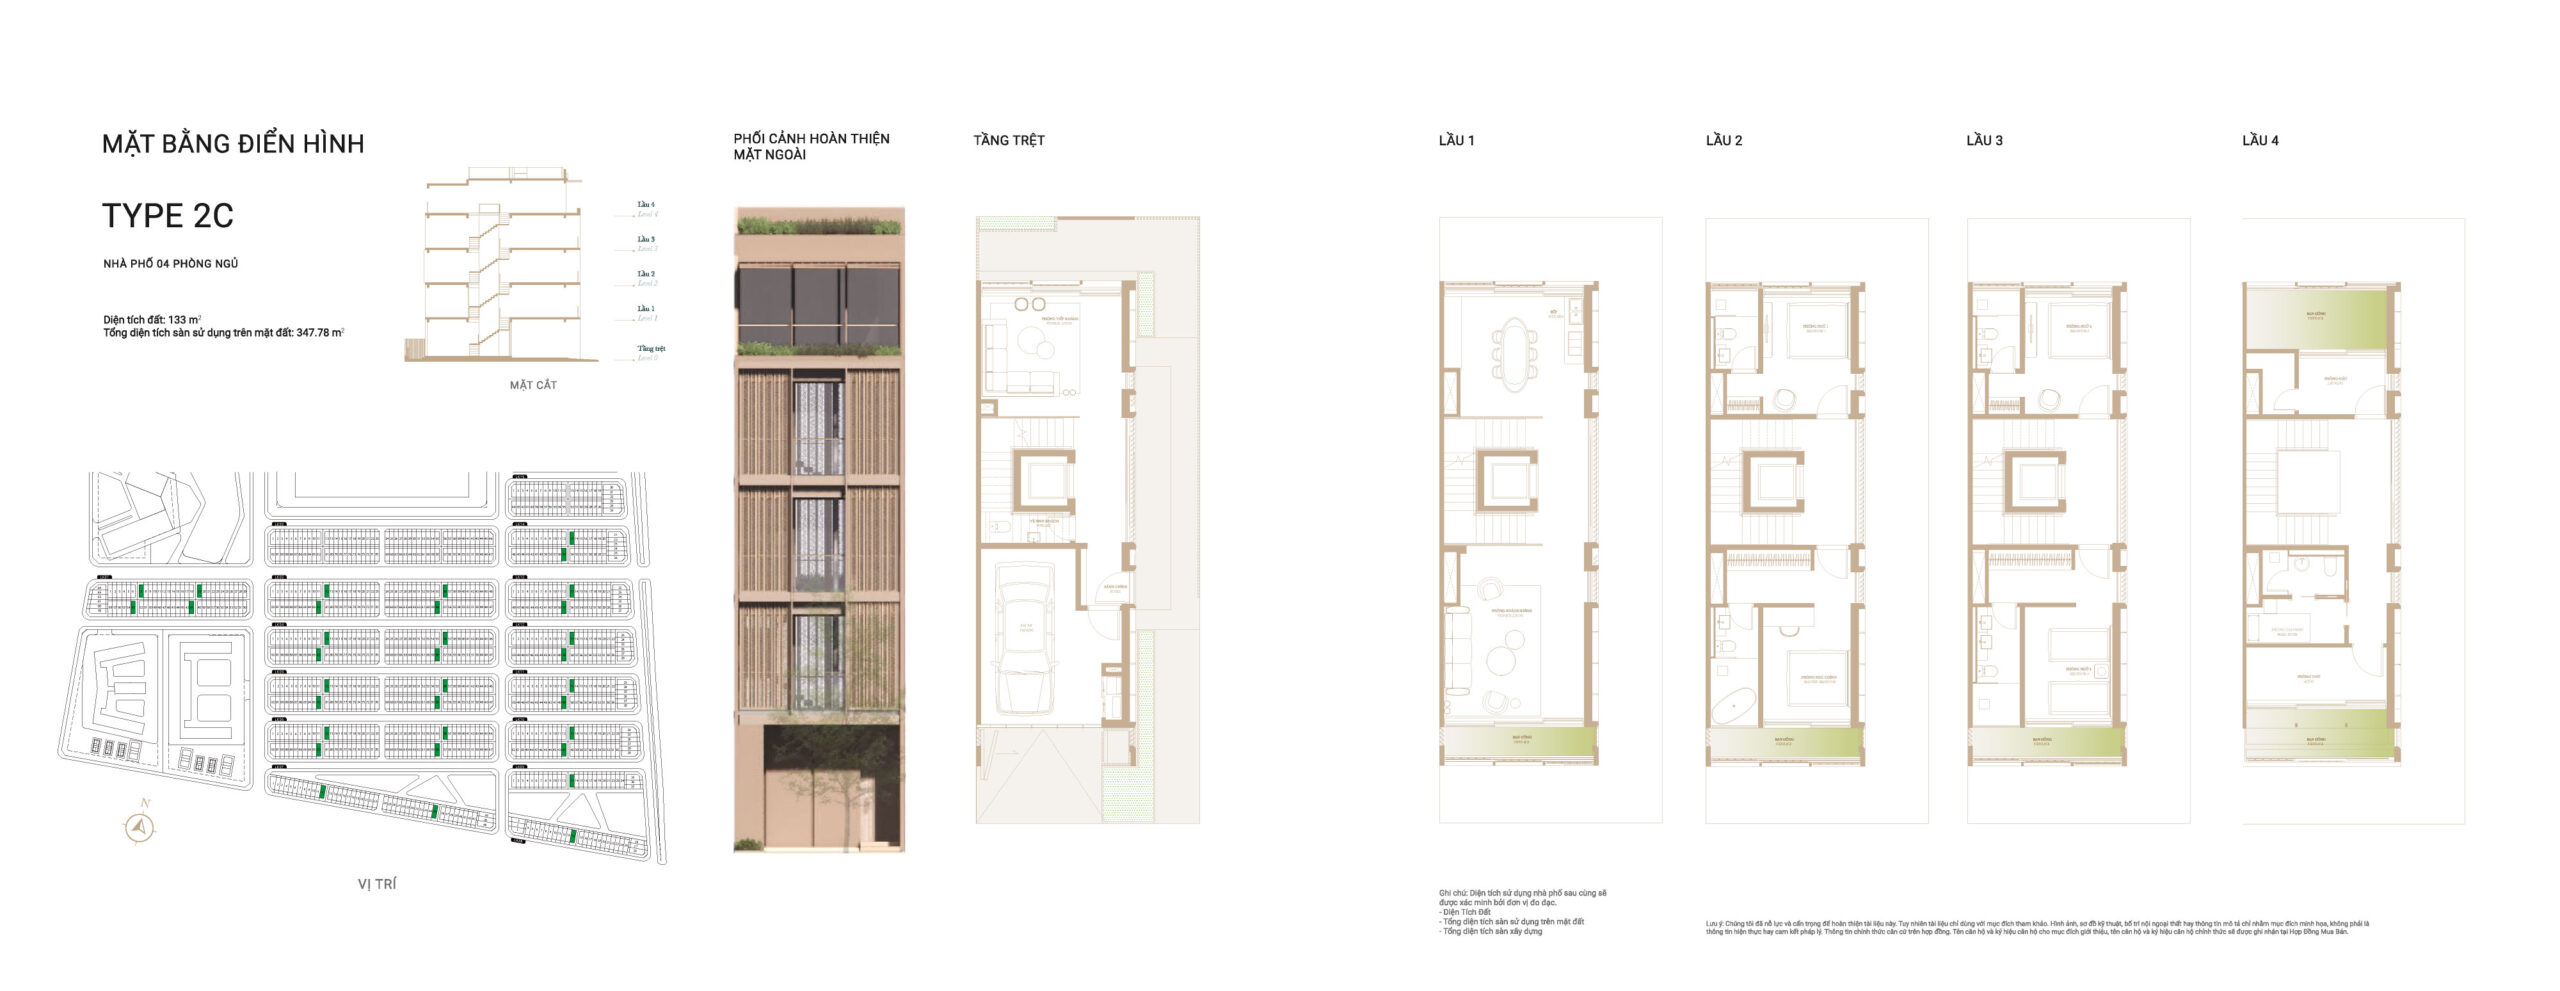 layout-mb-shophouse-2c-the-global-city